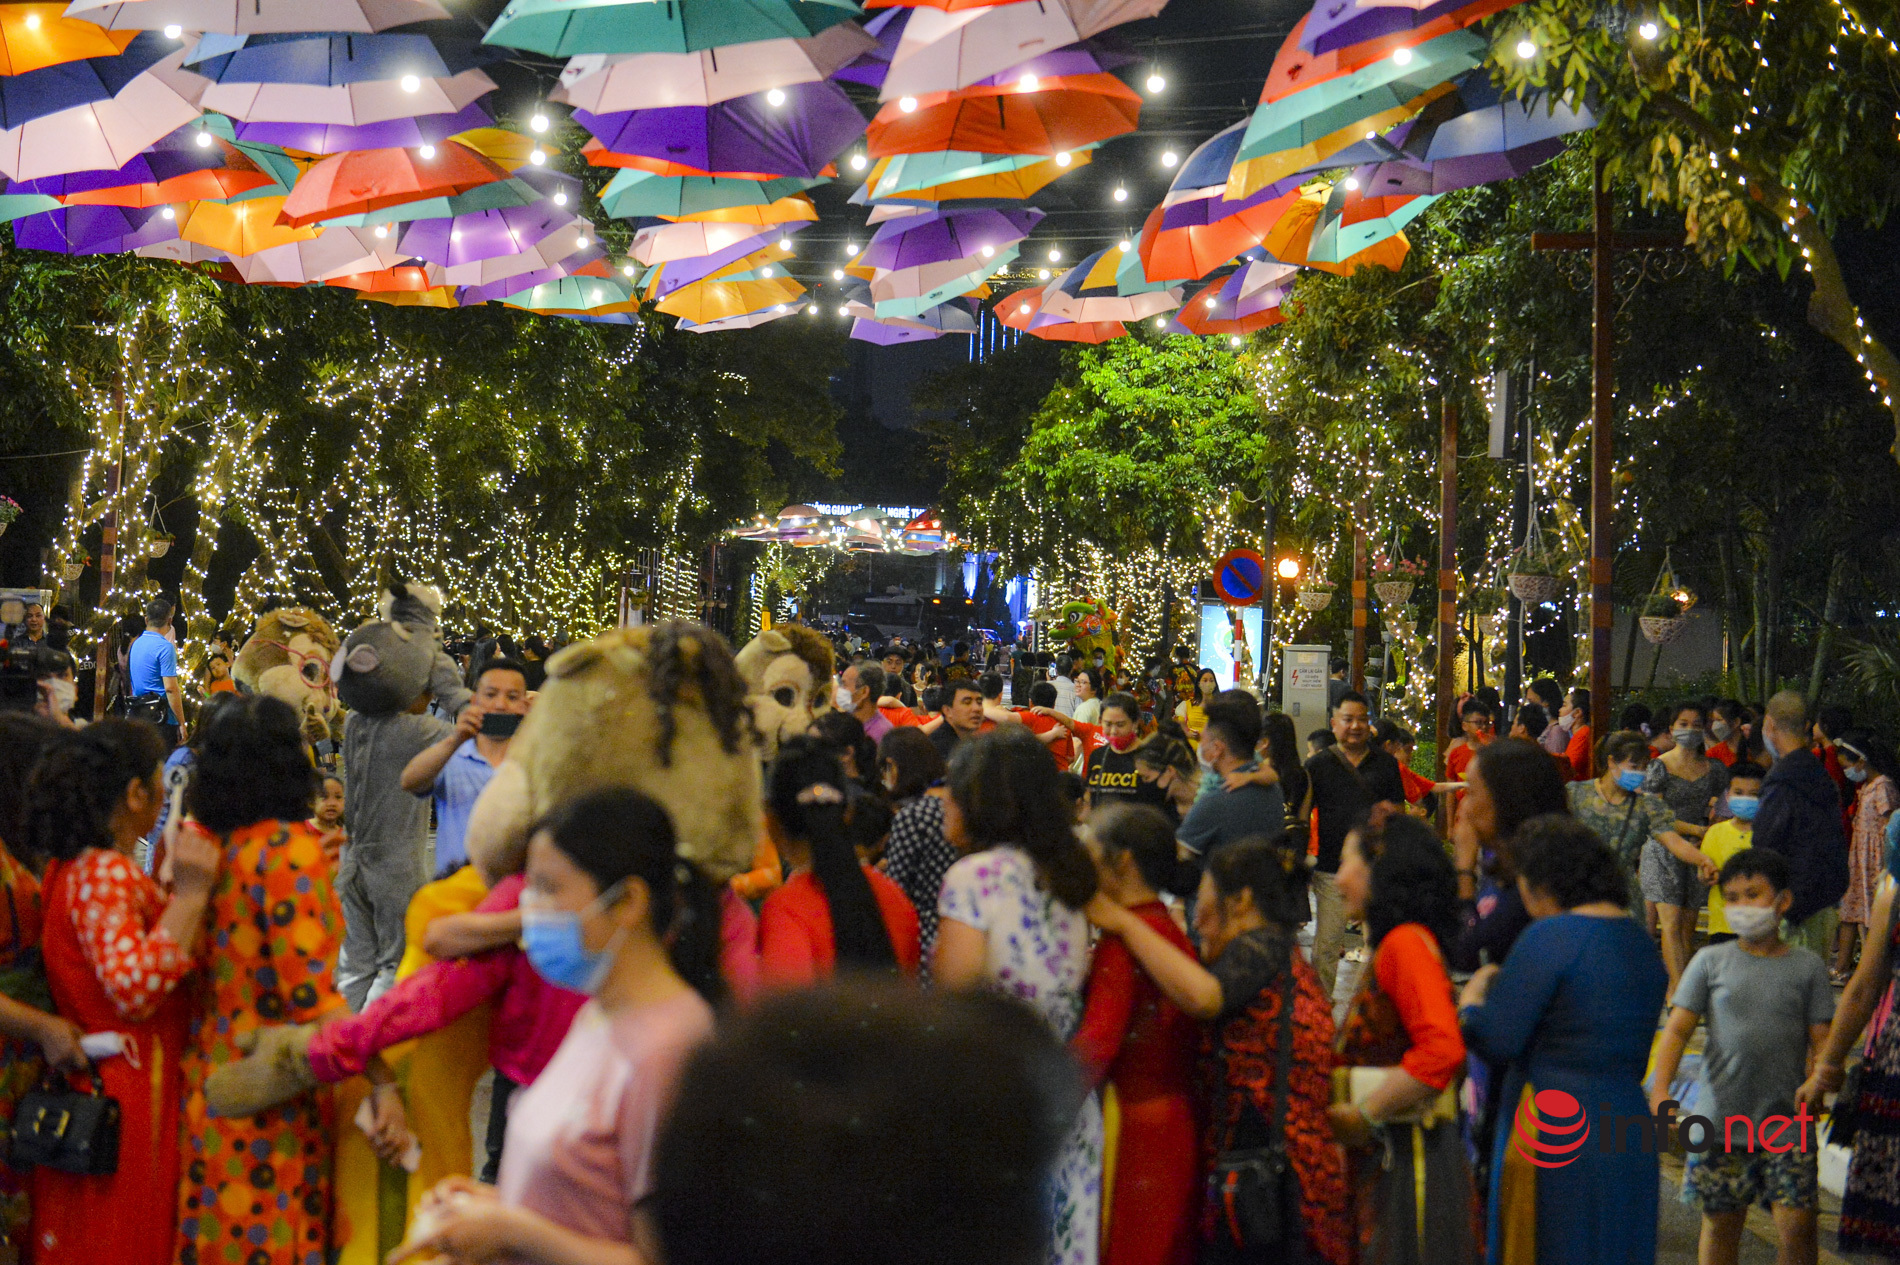 Thousands of people flocked to Trinh Cong Son pedestrian street on the day of reopening